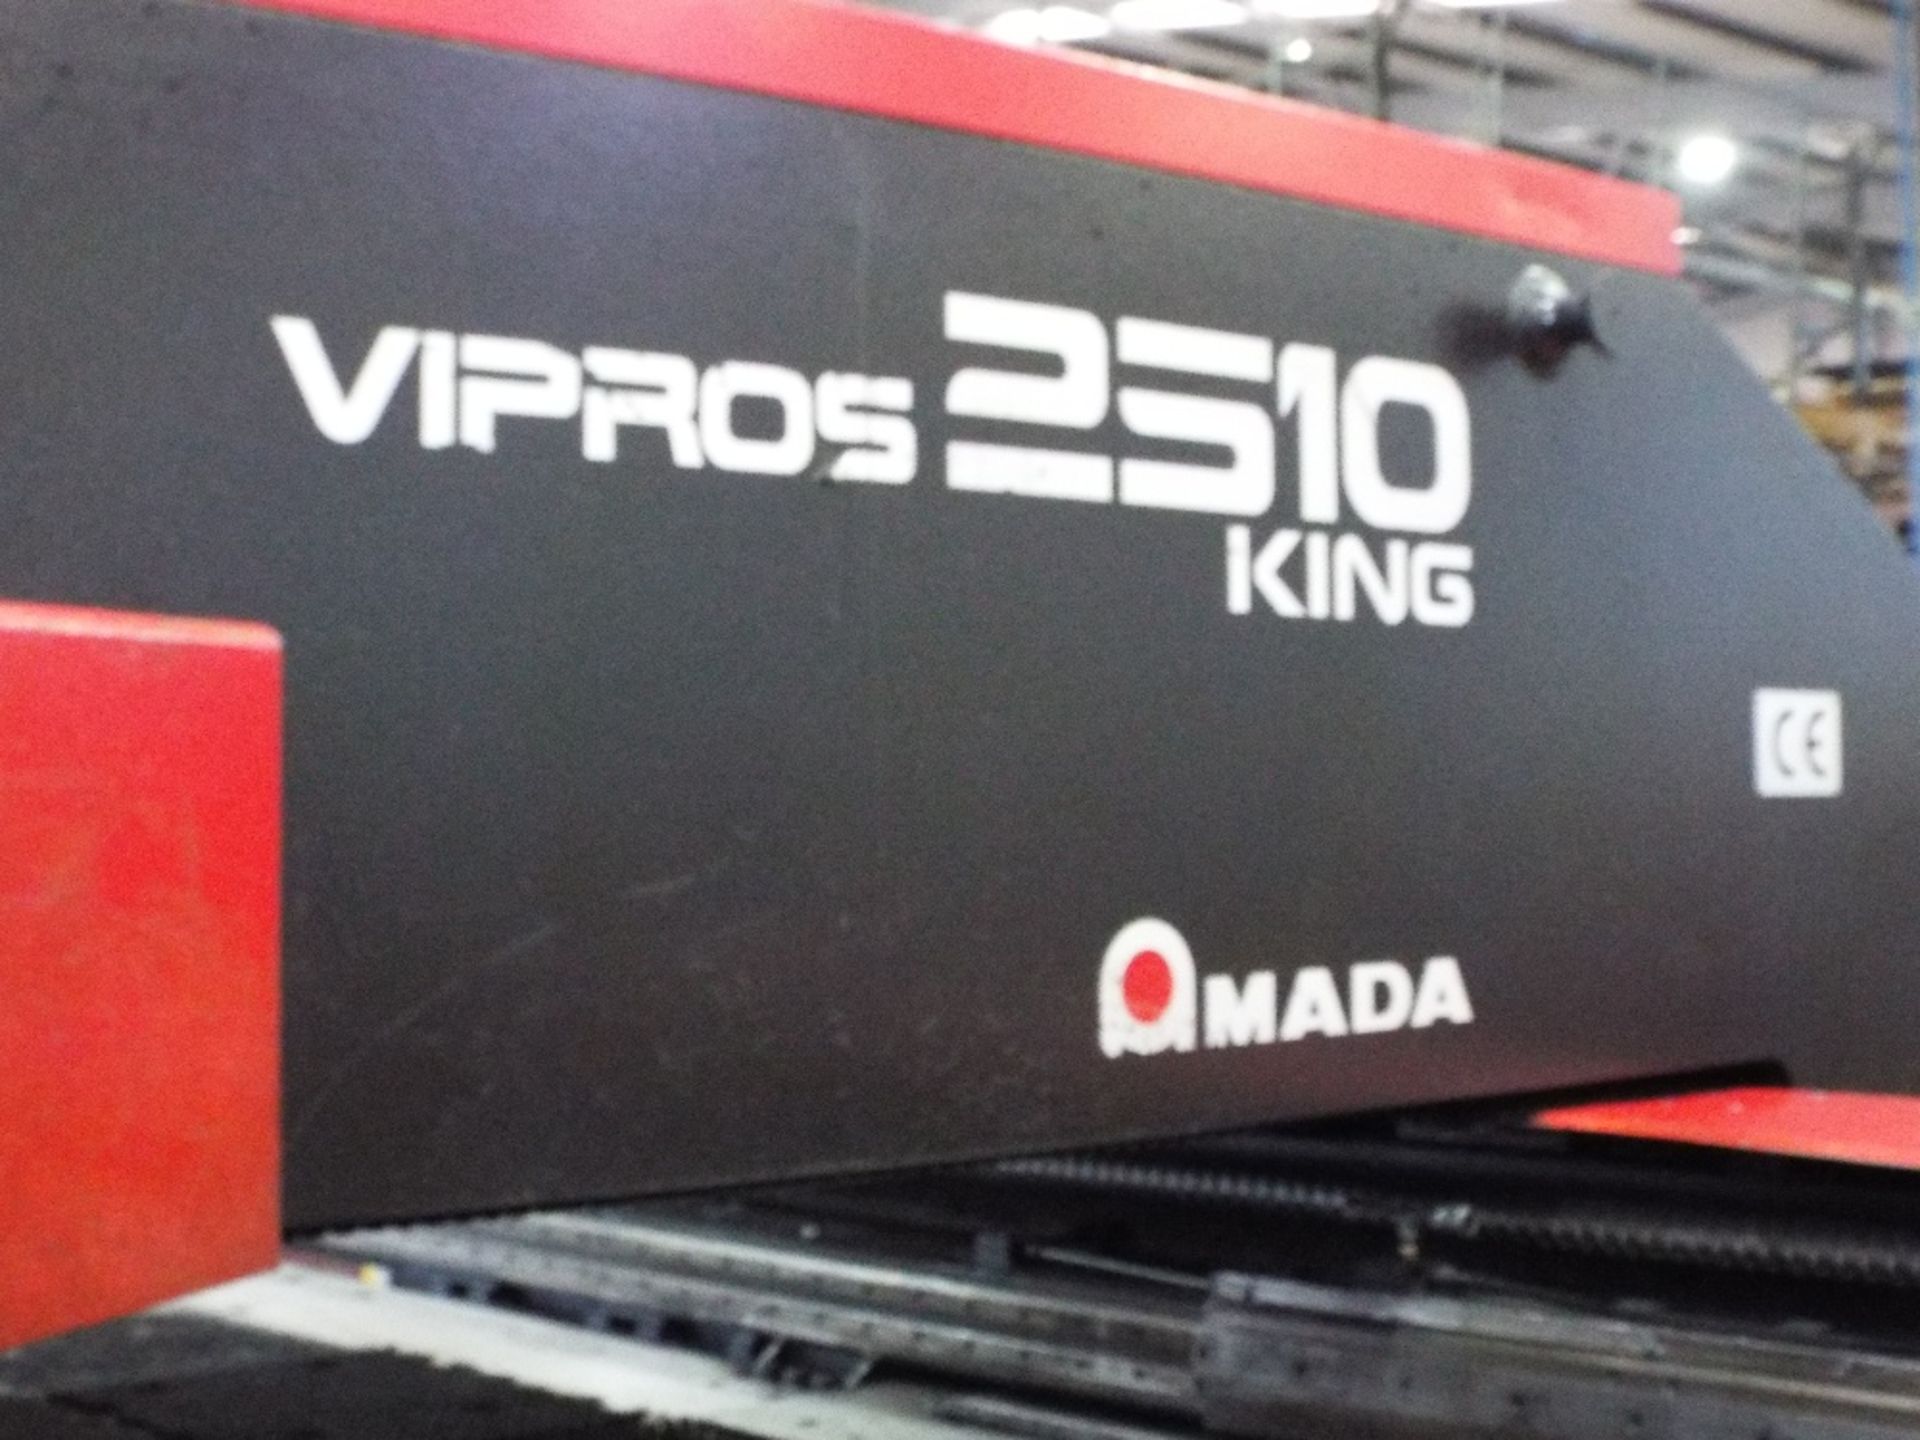 Amada Vipros 2510 King Turret Punch Press Cell - Image 2 of 44